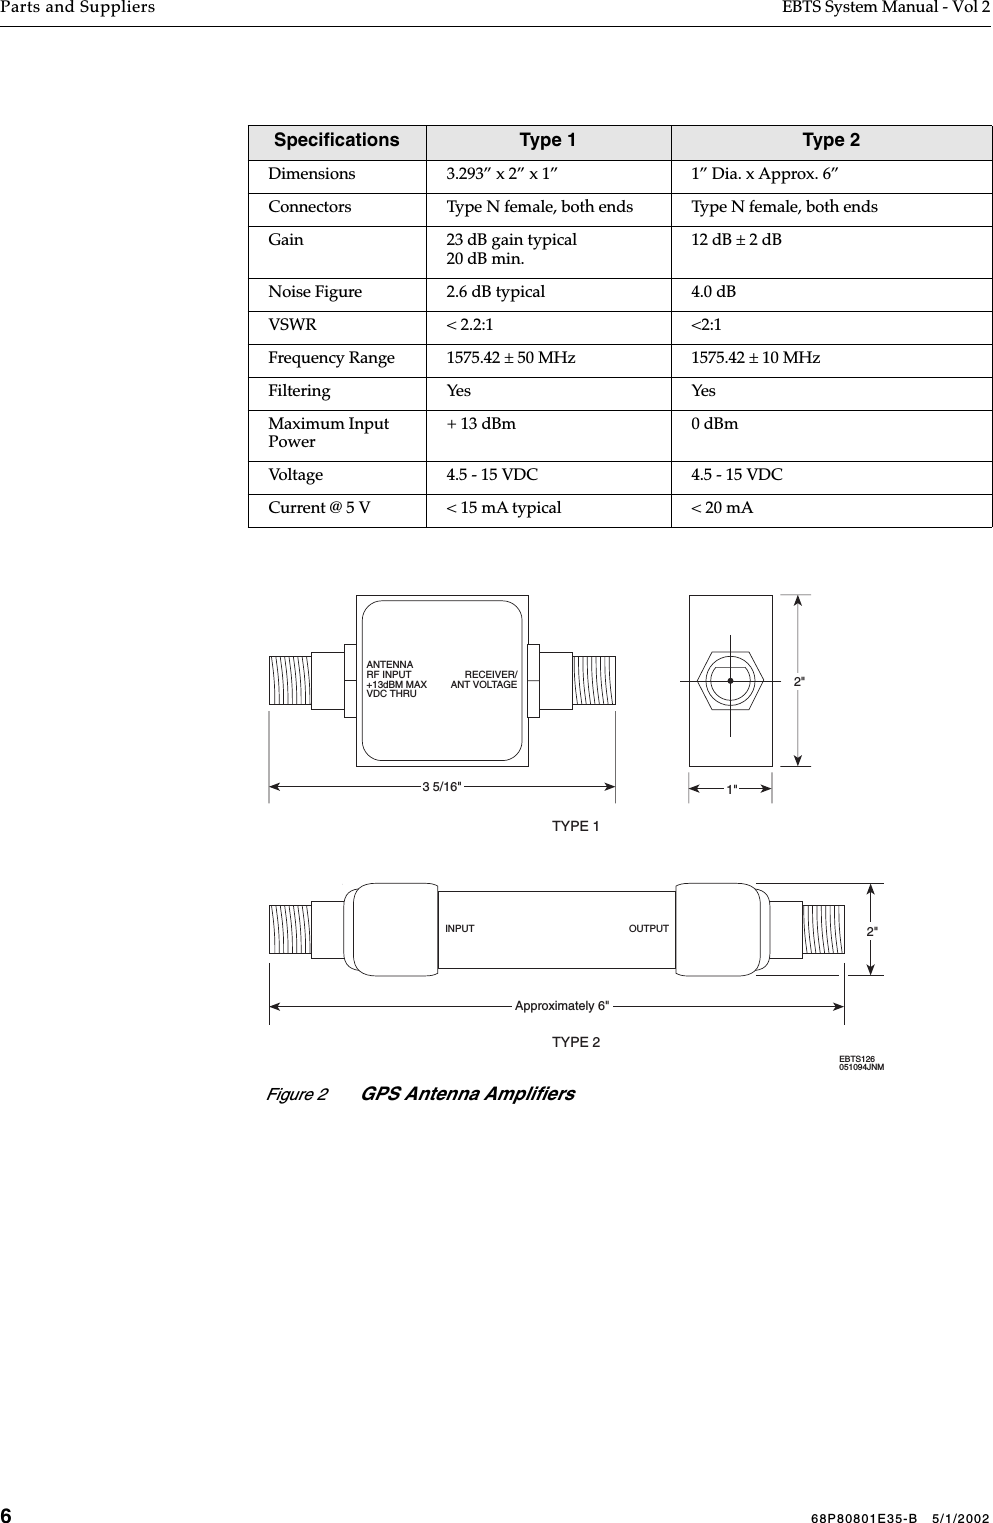 668P80801E35-B   5/1/2002Parts and Suppliers EBTS System Manual - Vol 2 Speciﬁcations Type 1 Type 2Dimensions 3.293” x 2” x 1” 1” Dia. x Approx. 6”Connectors Type N female, both ends Type N female, both endsGain 23 dB gain typical20 dB min.12 dB ± 2 dBNoise Figure  2.6 dB typical 4.0 dBVSWR &lt; 2.2:1 &lt;2:1Frequency Range 1575.42 ± 50 MHz 1575.42 ± 10 MHzFiltering Yes YesMaximum Input Power+ 13 dBm 0 dBmVoltage 4.5 - 15 VDC 4.5 - 15 VDCCurrent @ 5 V &lt; 15 mA typical &lt; 20 mAFigure 2 GPS Antenna AmpliﬁersEBTS126051094JNMTYPE 1TYPE 21&quot;2&quot;3 5/16&quot;ANTENNARF INPUT+13dBM MAXVDC THRURECEIVER/ANT VOLTAGEApproximately 6&quot;2&quot;INPUT OUTPUT